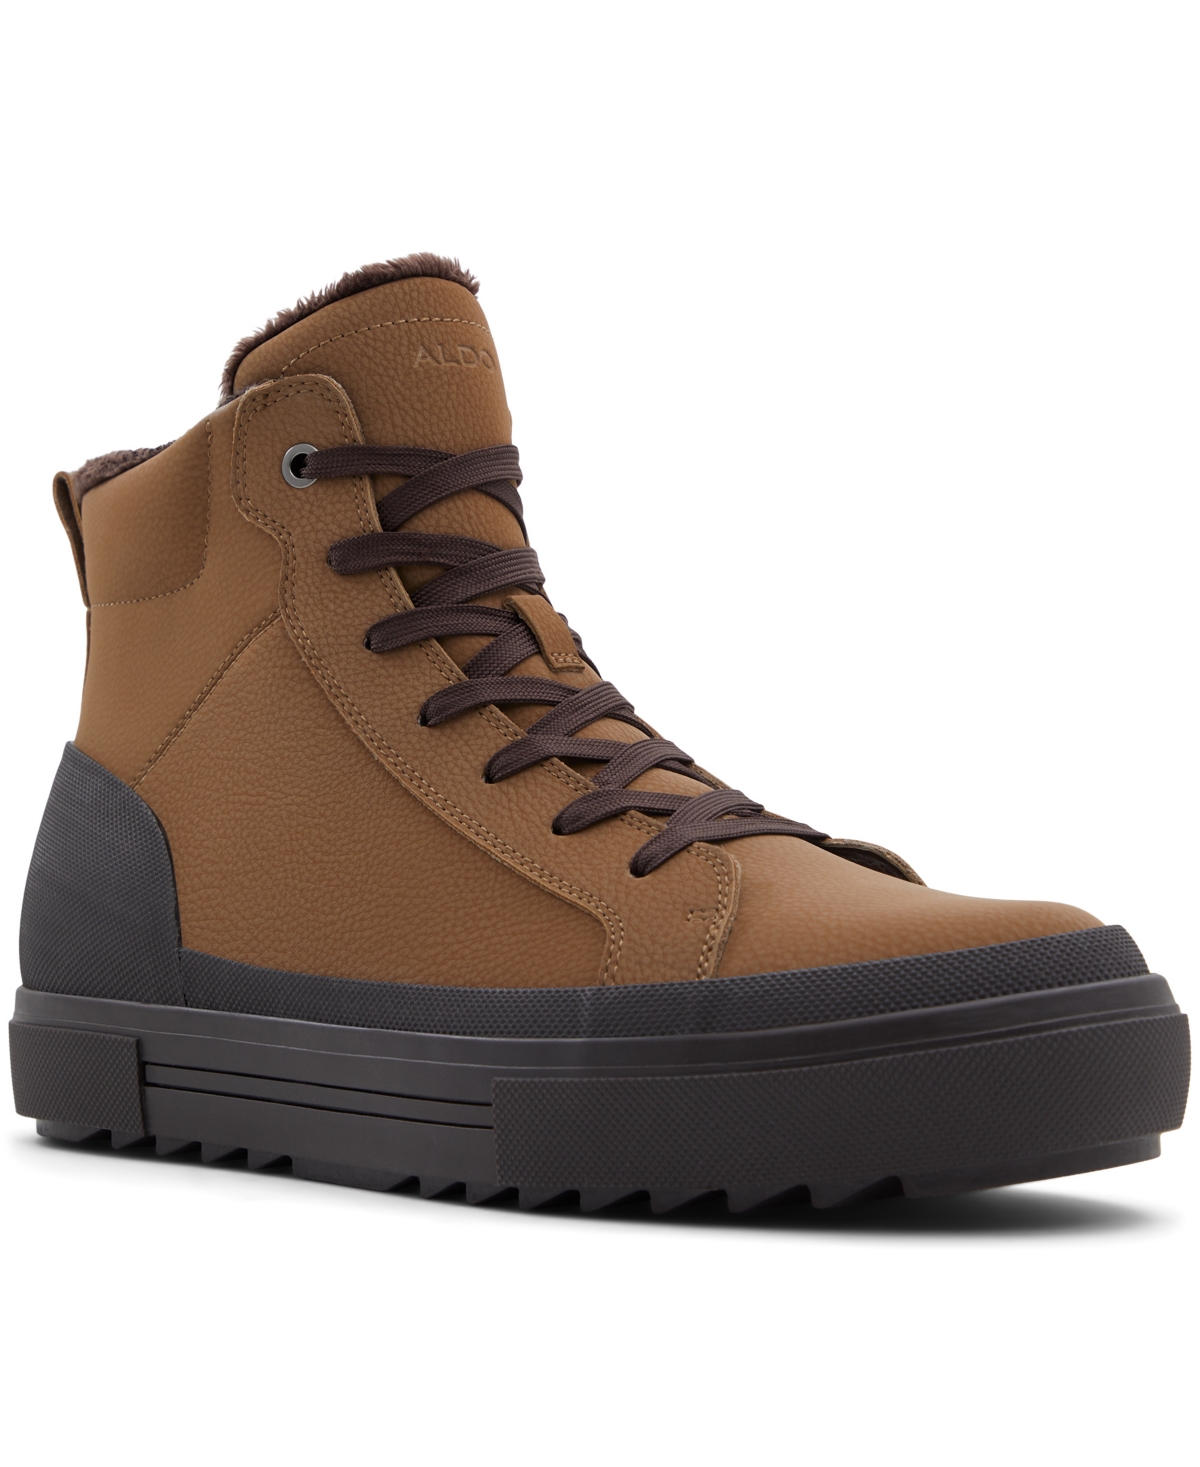 Men's Ulf Lace Up Boots - Other Dark Beige